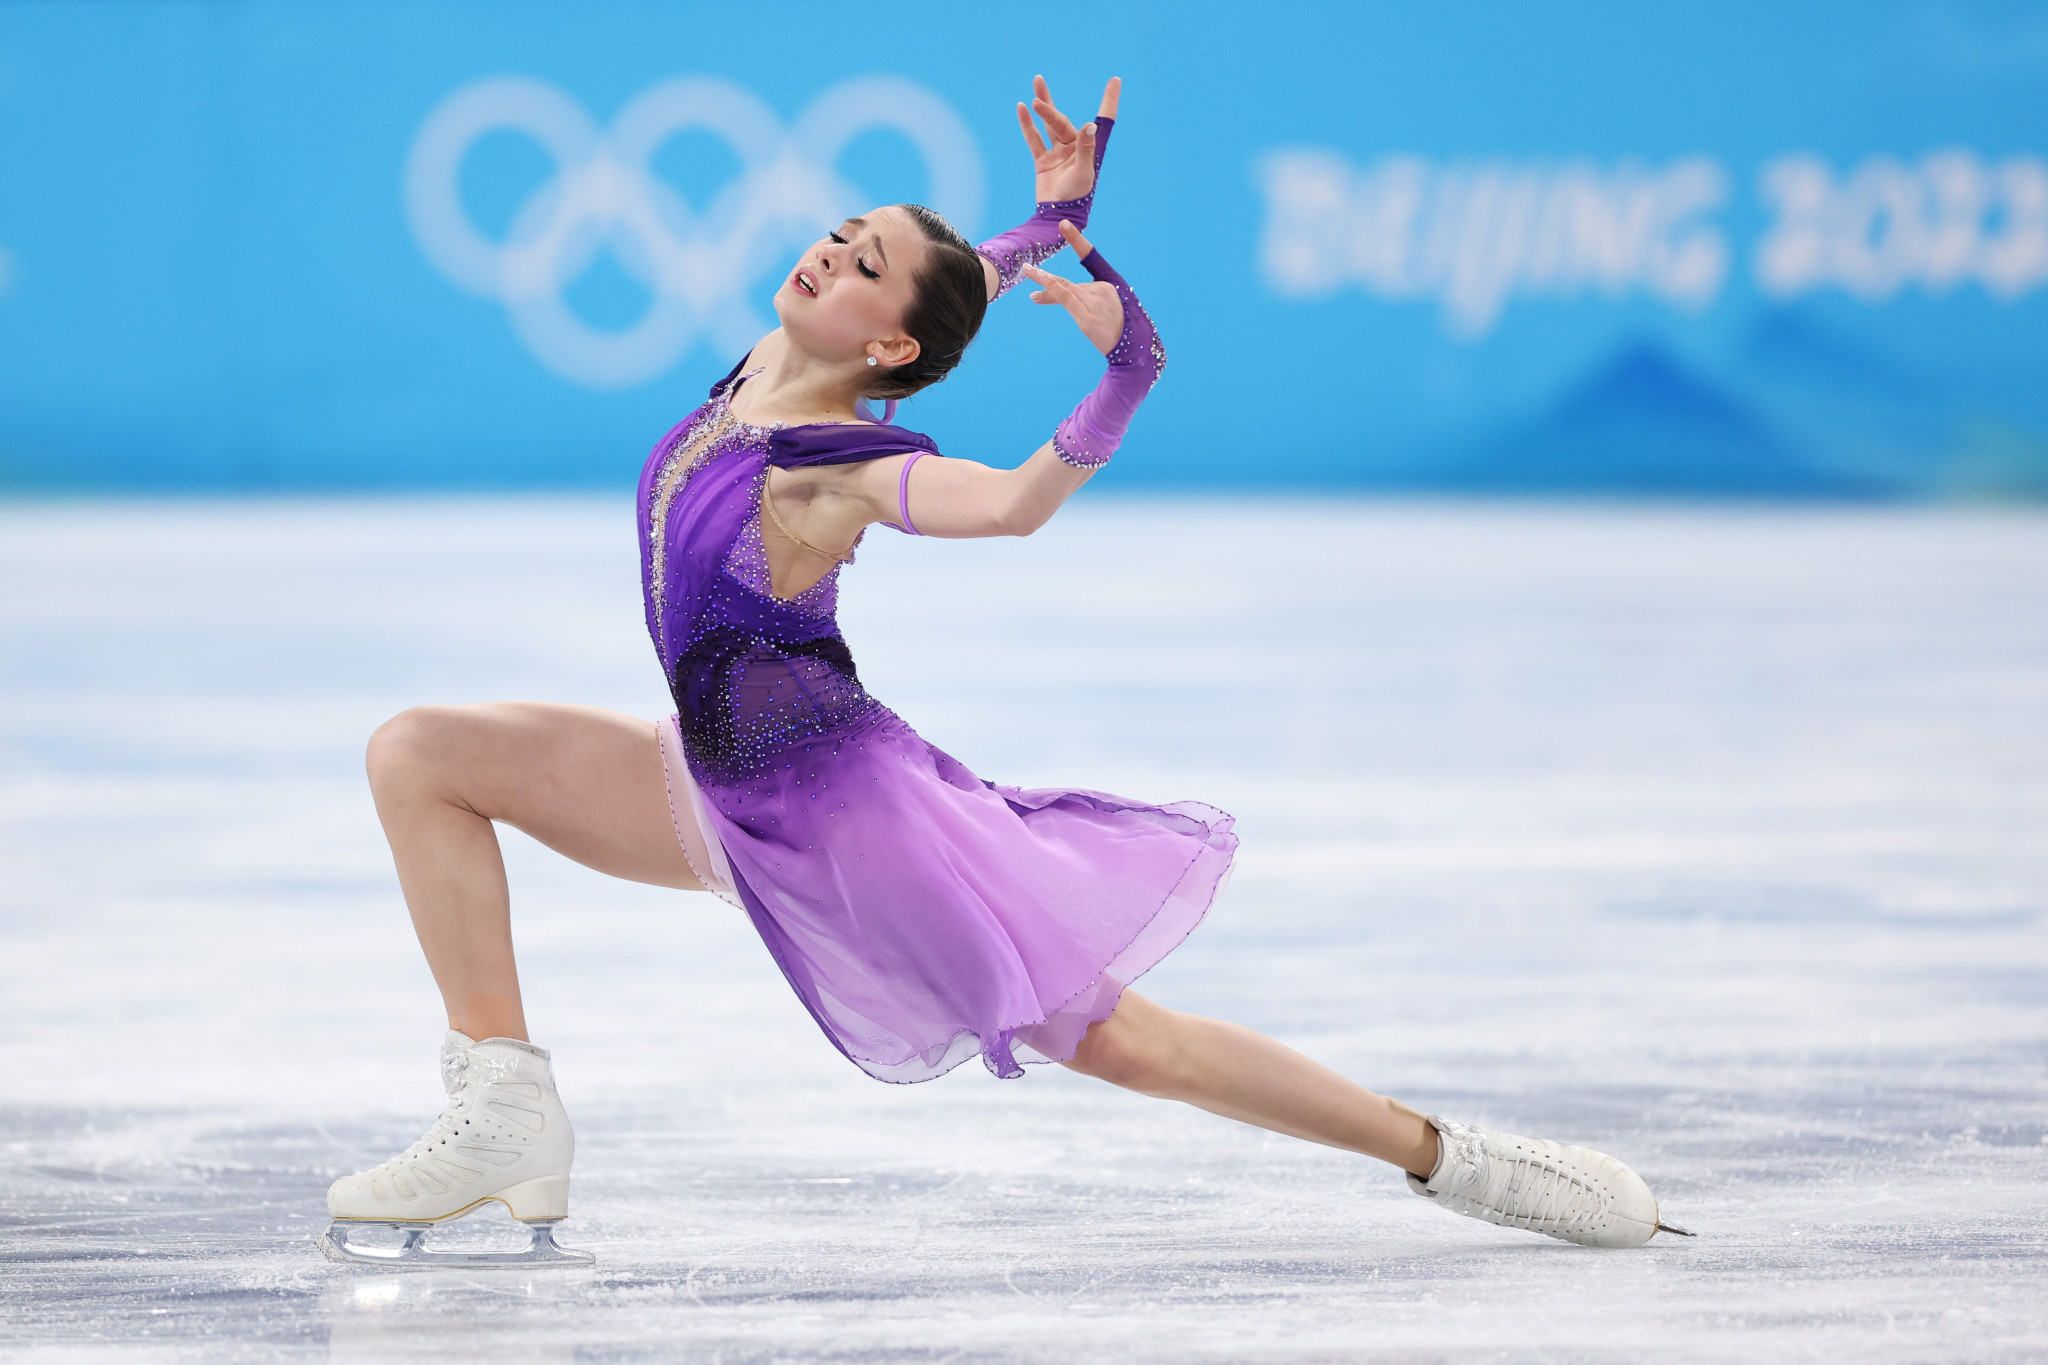 Russian figure skater Kamila Valieva's positive drugs test from December 25 was only reported on February 8 during the Beijing 2022 Winter Olympics ©Getty Images